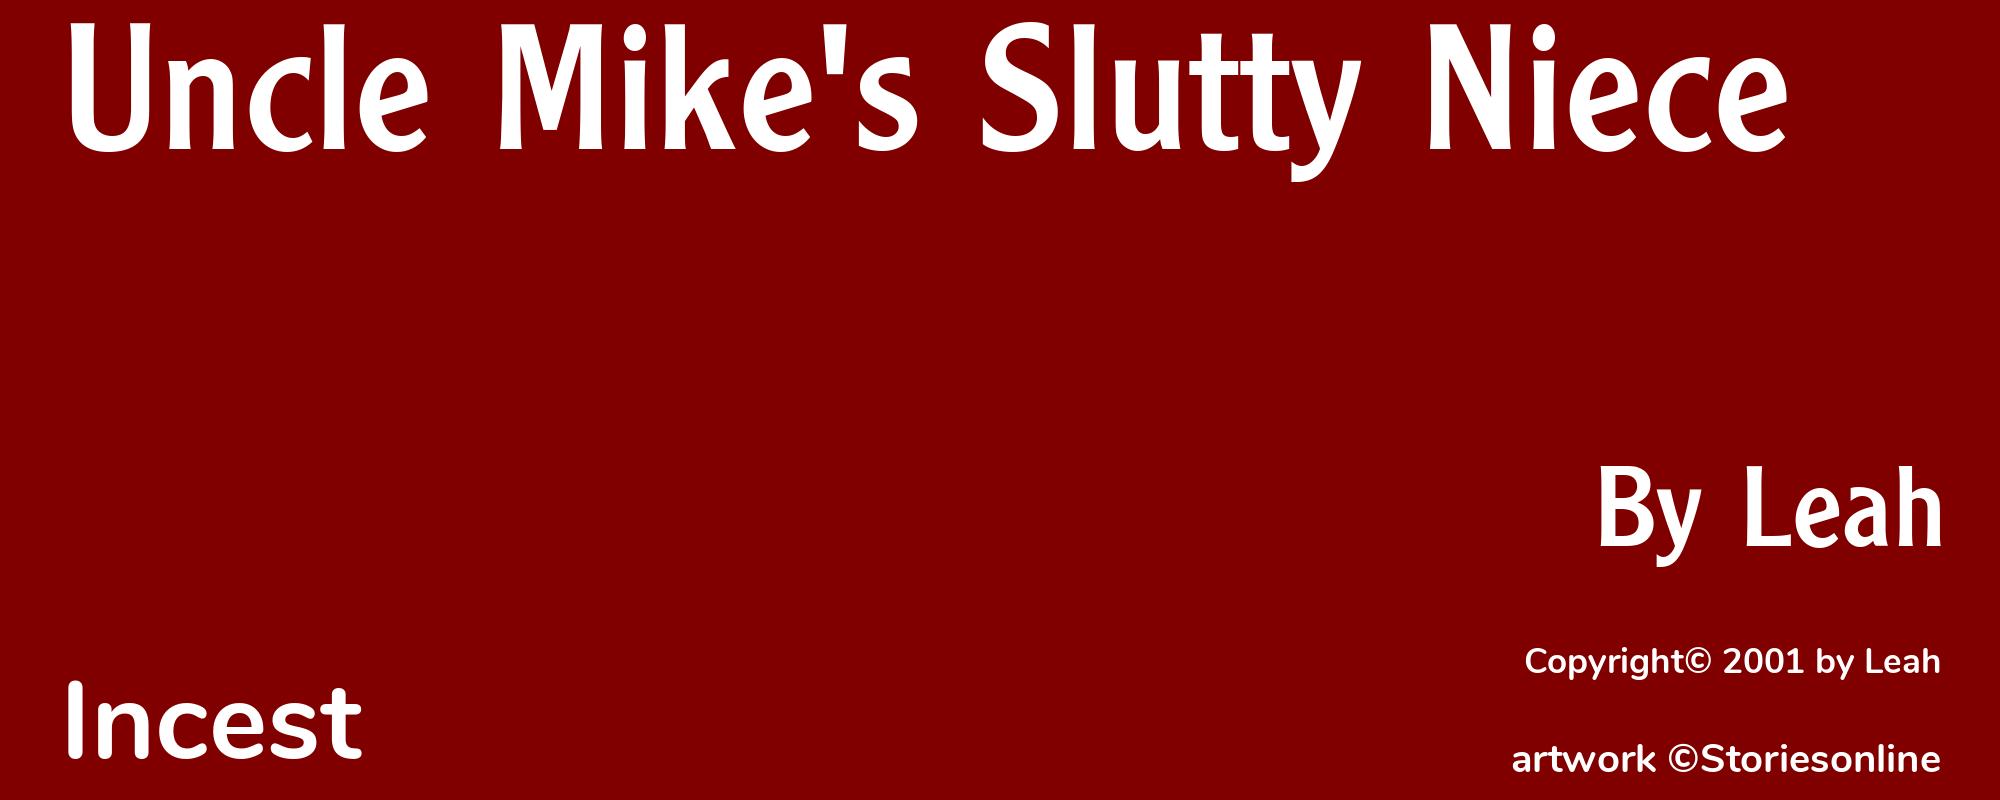 Uncle Mike's Slutty Niece - Cover